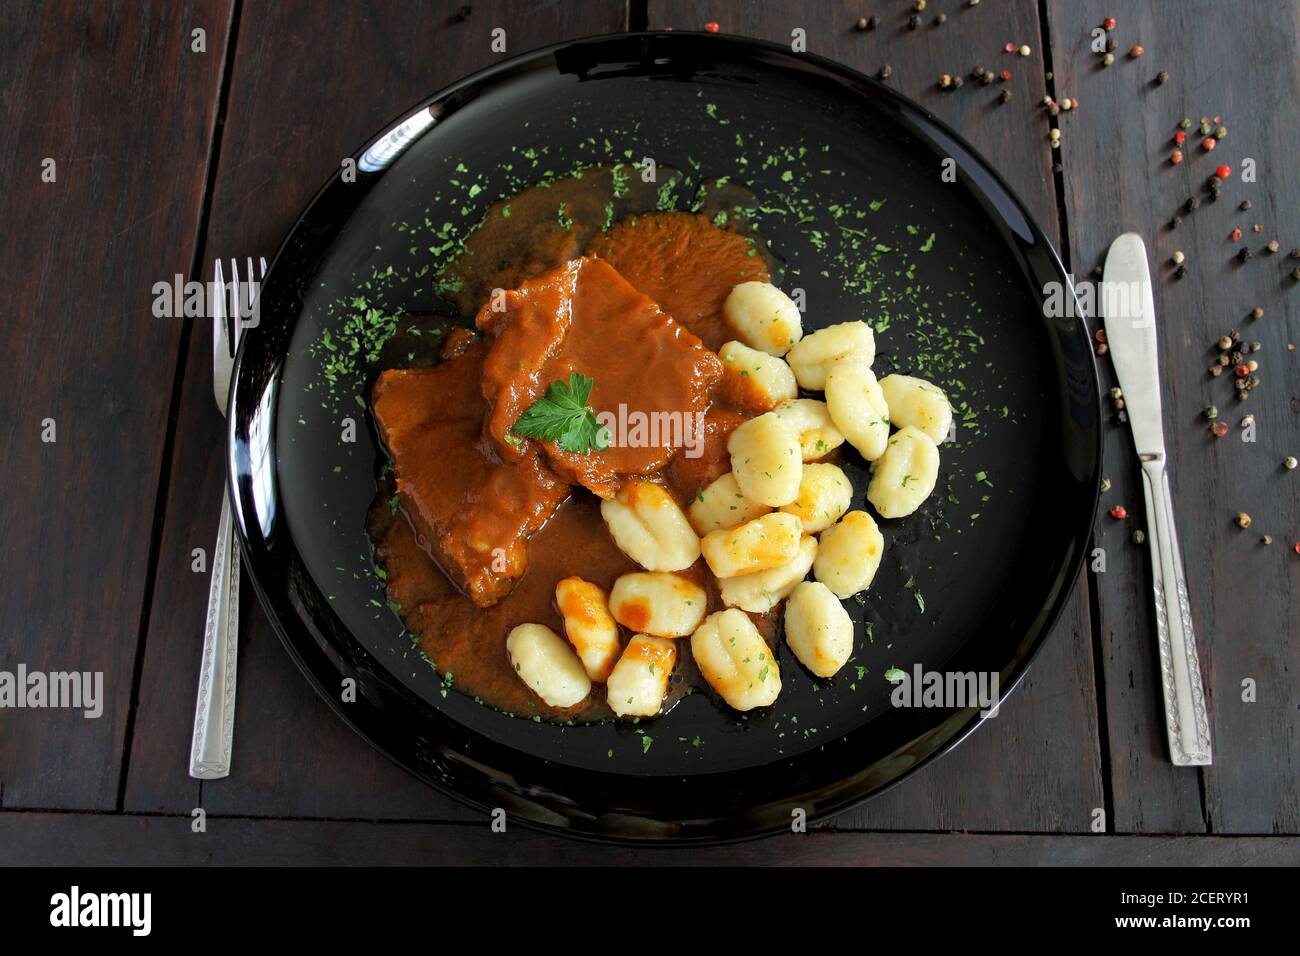 Pasticada with gnocchi, beef stew in a sauce. Croatian cuisine Stock Photo